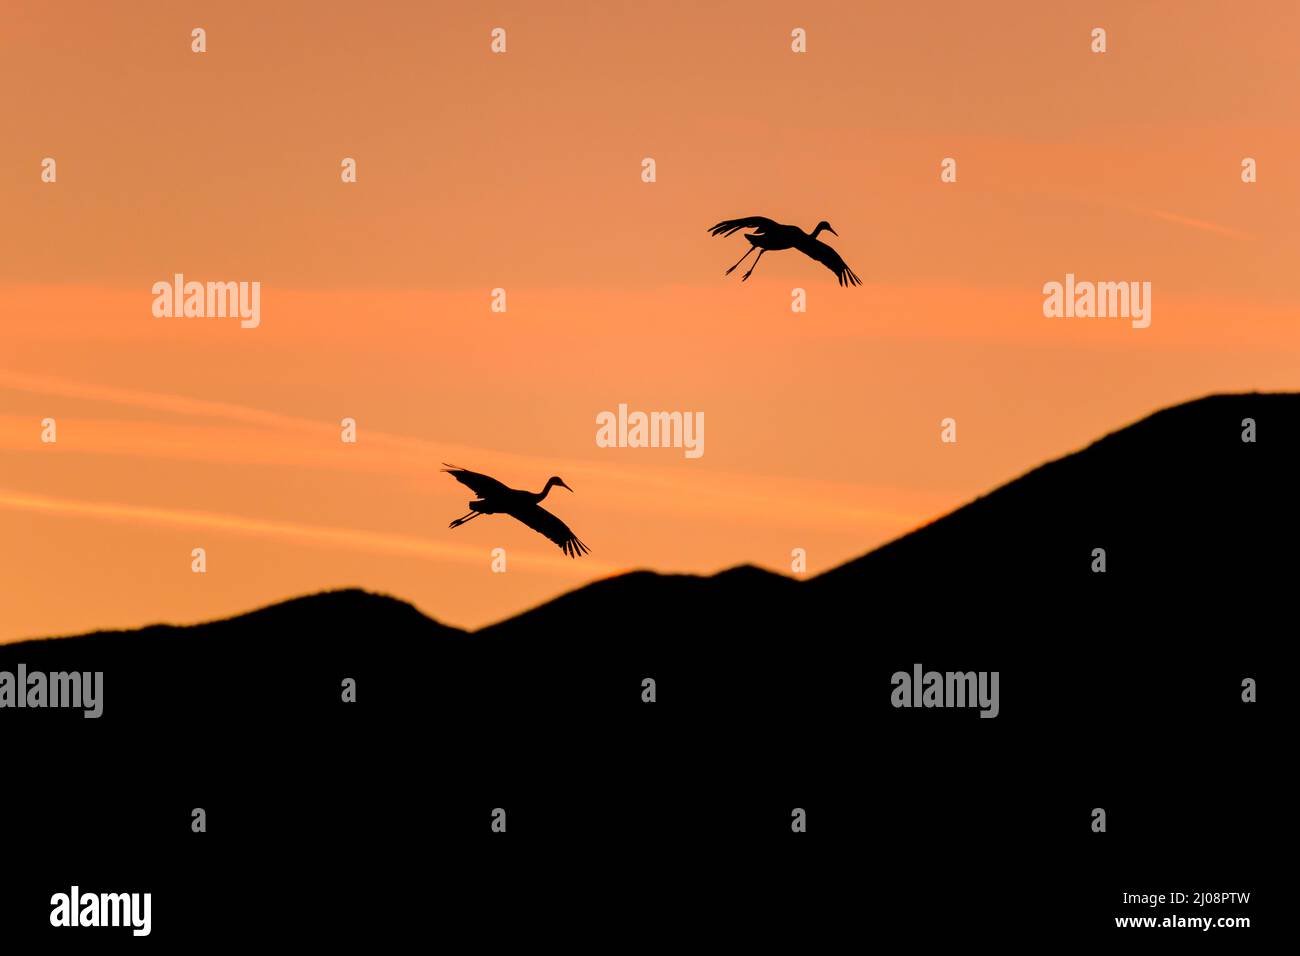 Flying in Evening Sky - A pair of Sandhill Crane flying in colorful dusk sky over rolling hills. New Mexico, USA. Stock Photo